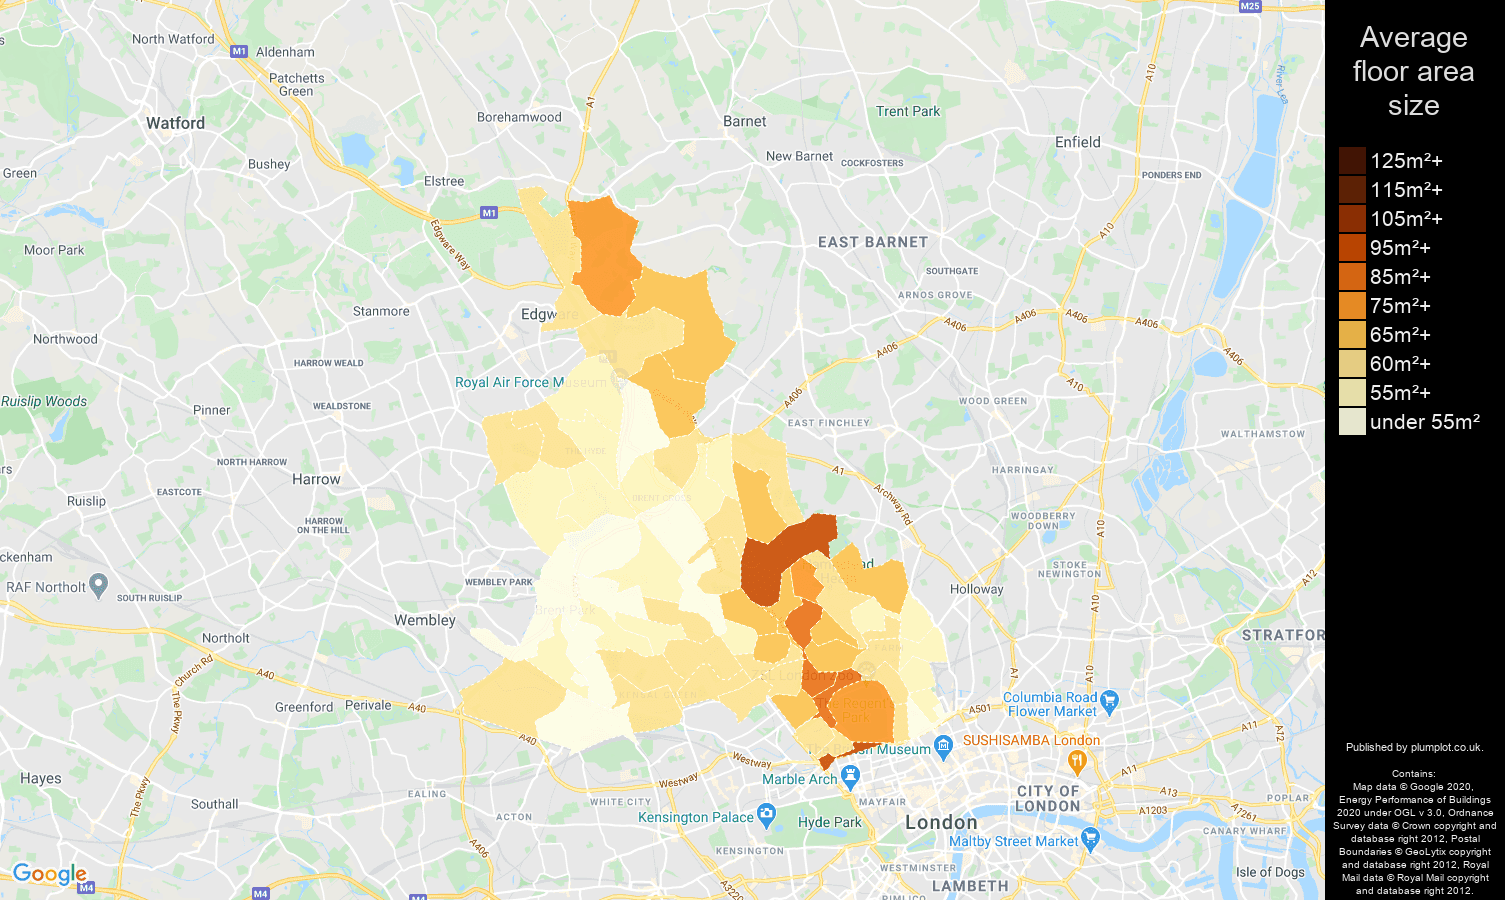 North West London map of average floor area size of flats